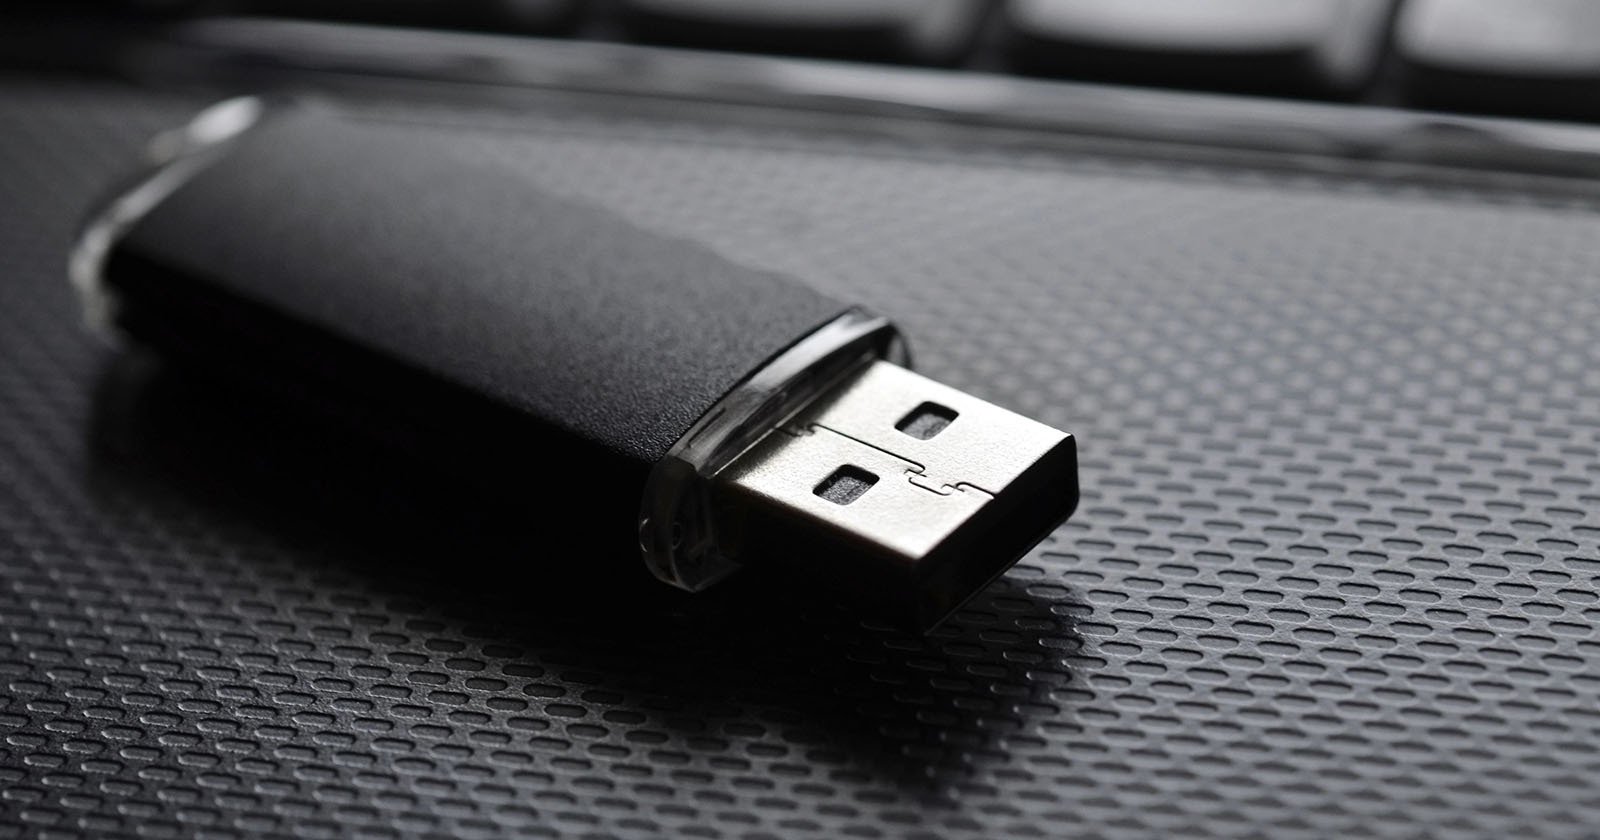  german data specialists finds many faulty usb thumb 